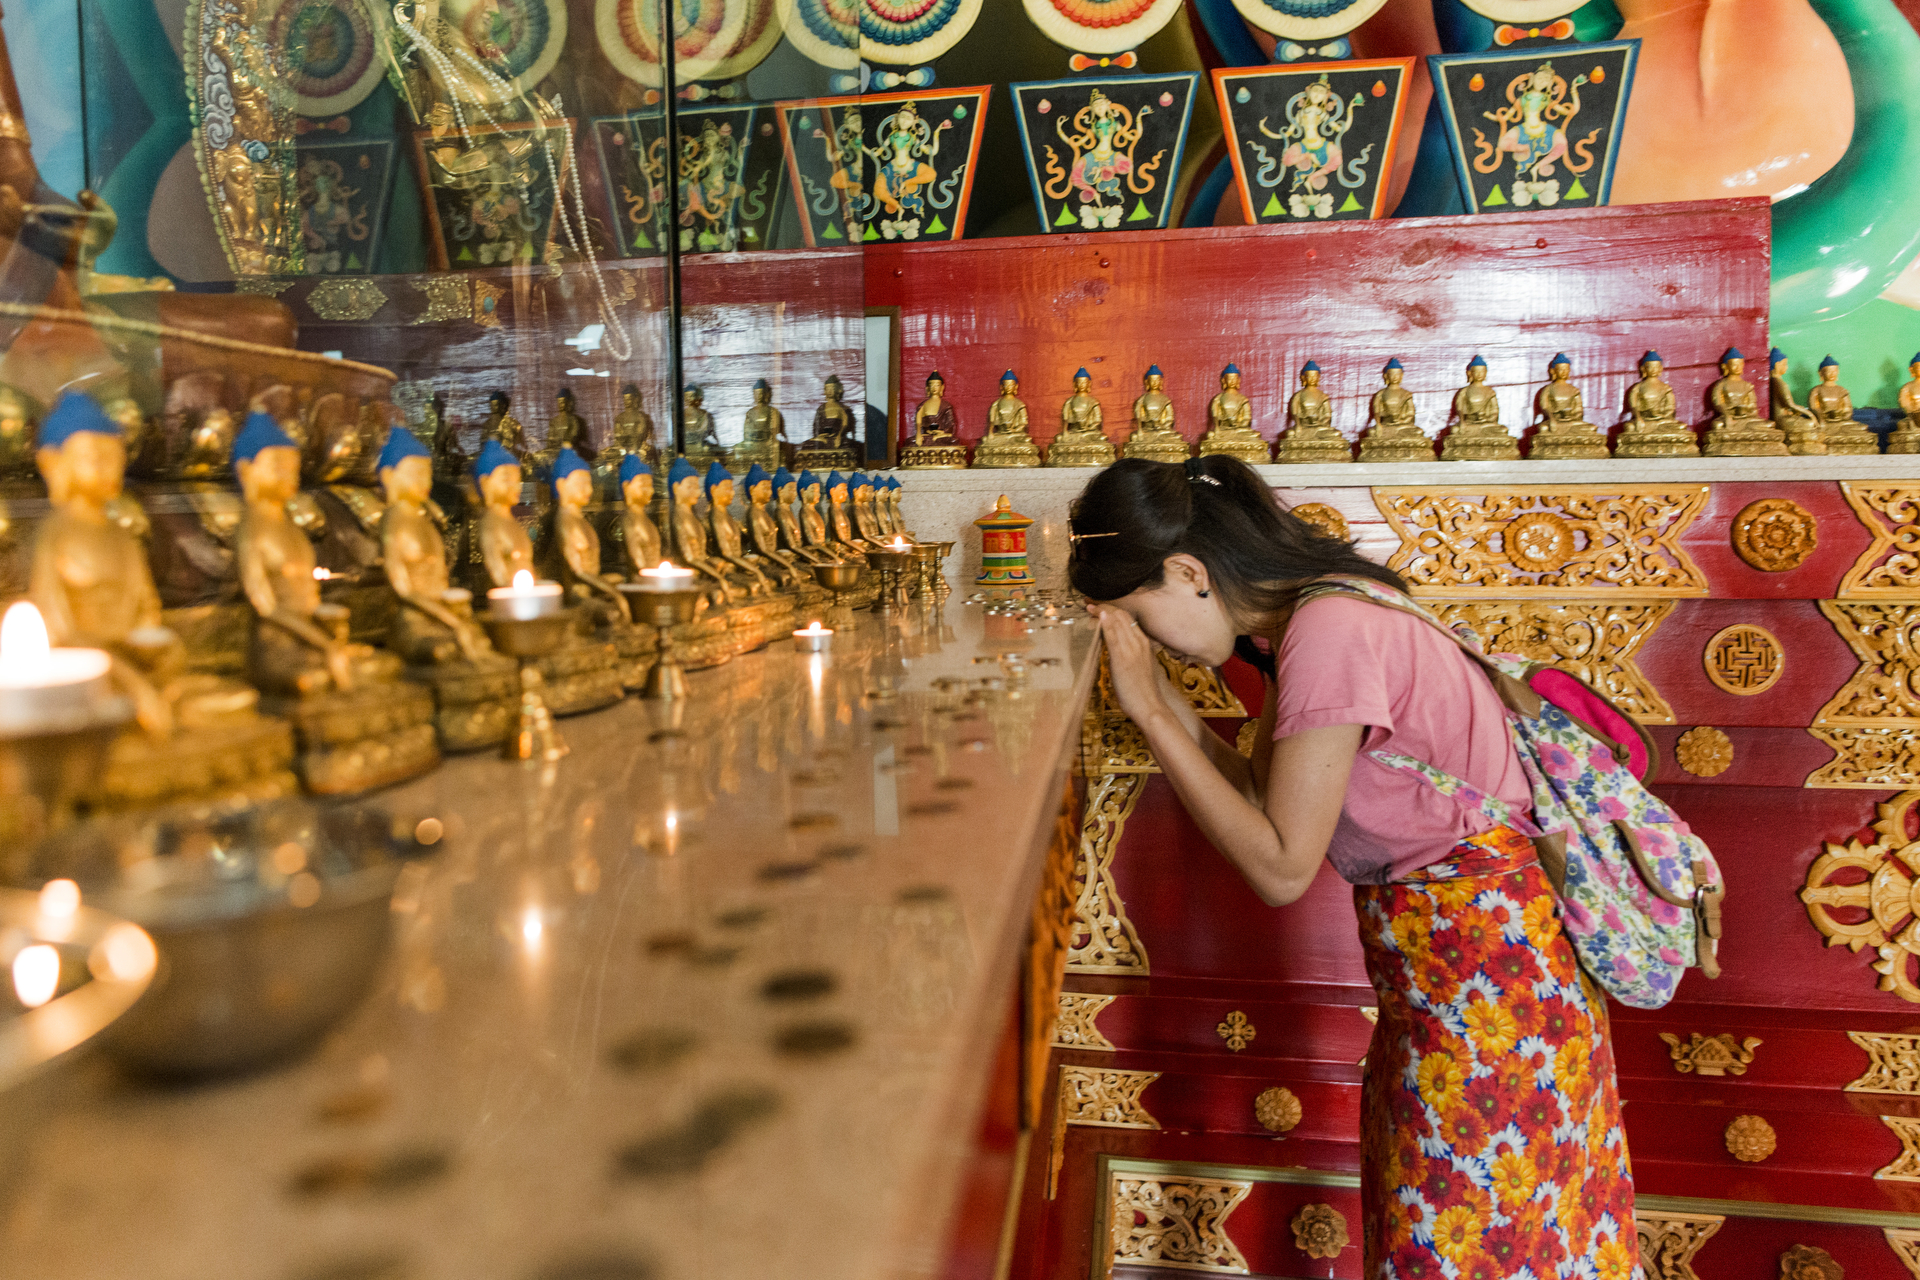  A young woman prays inside the main Buddhist temple of Elista, know locally as a Khurul, in Elista, Russia, June 2016. 